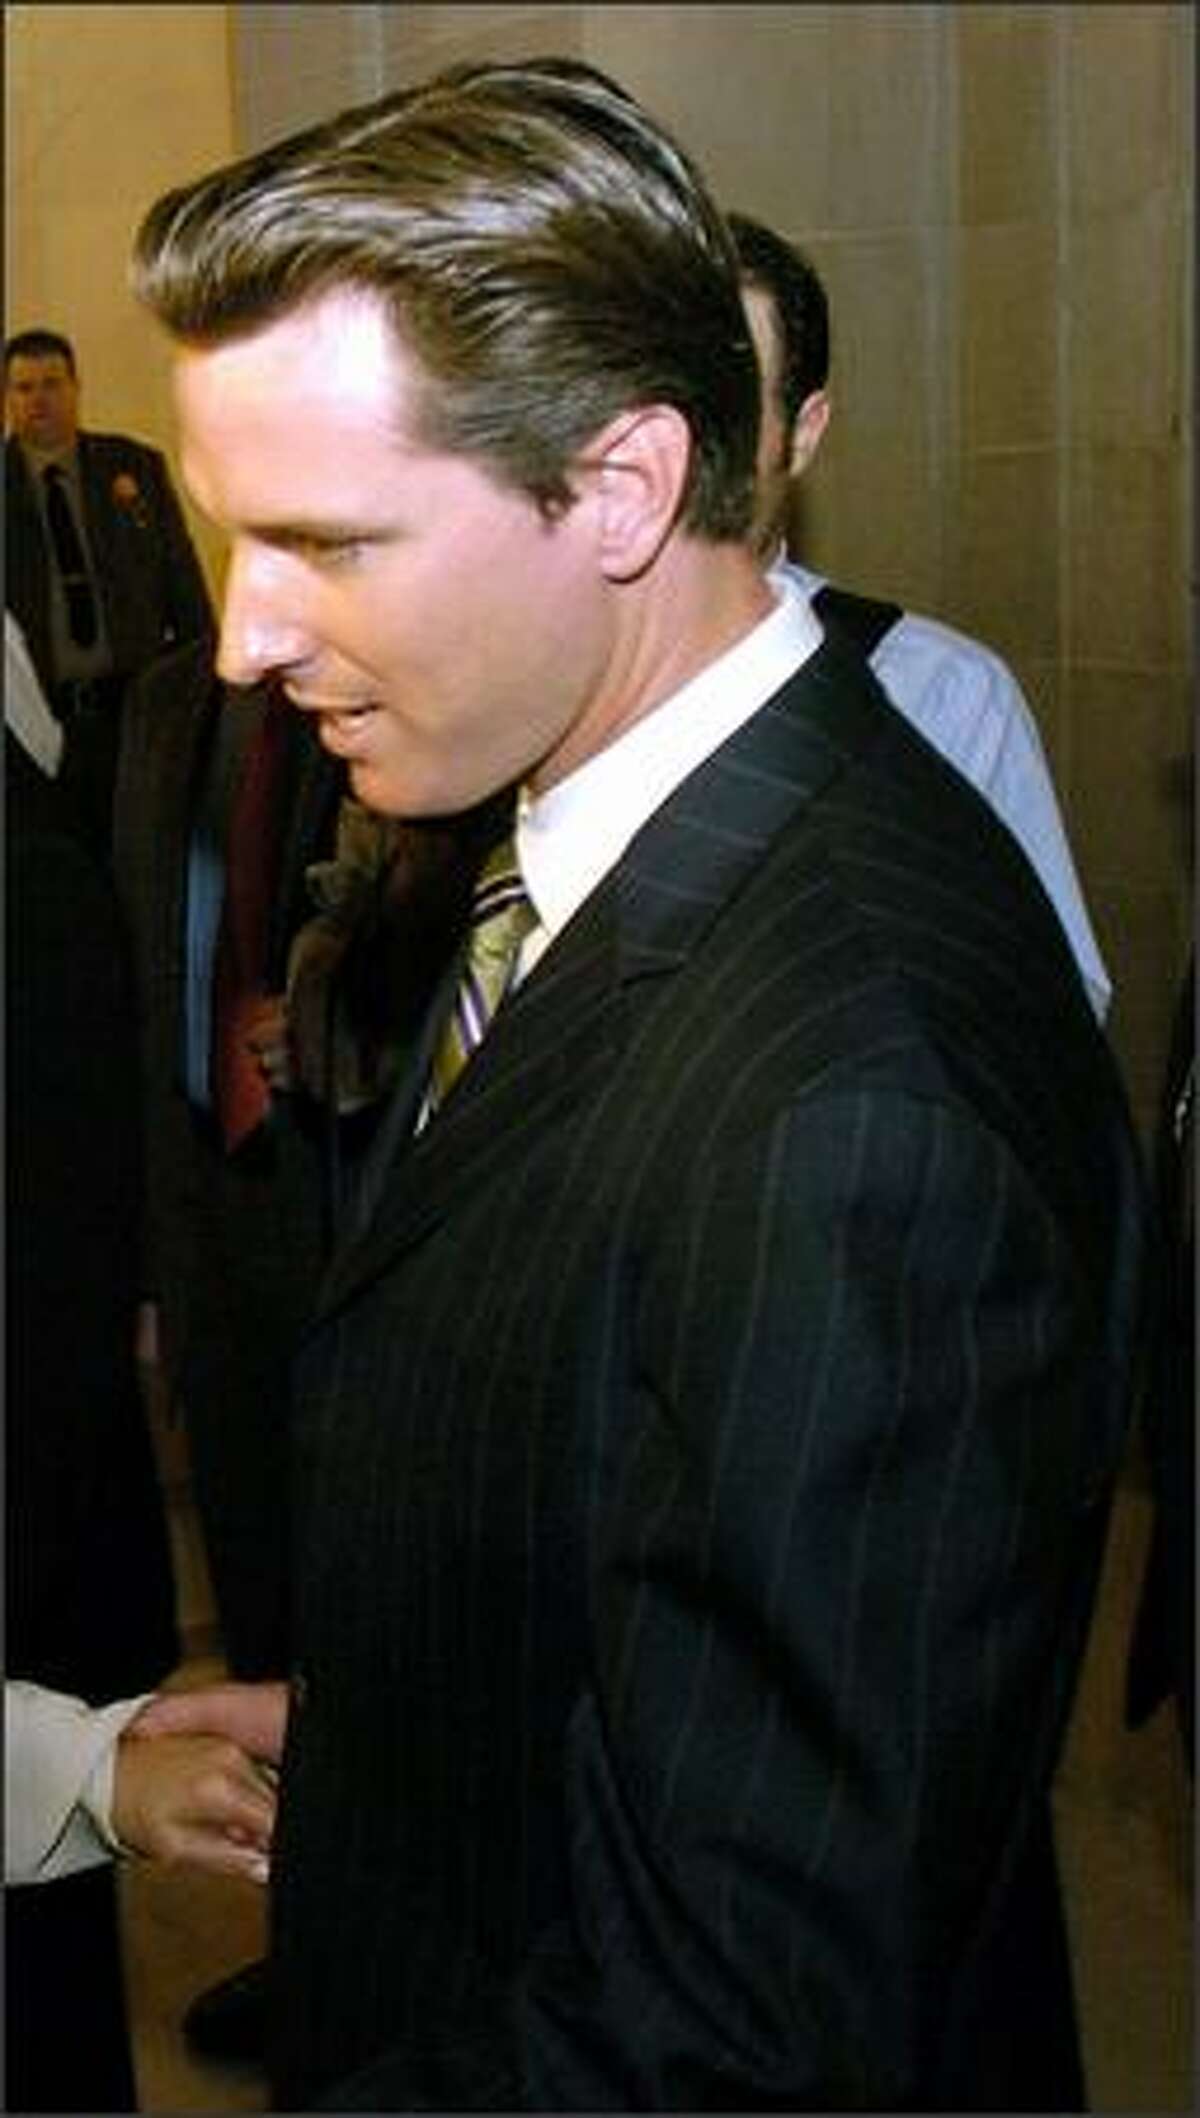 Pali Cooper, left, and her partner, Jeanne Rizzo, speak with San Francisco Mayor Gavin Newsom on Thursday, March 11, 2004, in San Francisco. Rizzo and Pali missed being allowed to be wed by 10 minutes. The debate over whether same-sex couples are entitled to the right to marry moves back to a California courtroom on Wednesday, Dec. 22, 2004. Rizzo and Cooper are among the 12 same-sex Bay Area couples who filed lawsuits after the California Supreme Court ordered city officials to stop issuing marriage licenses to gay and lesbian couples. (AP Photo/Noah Berger)